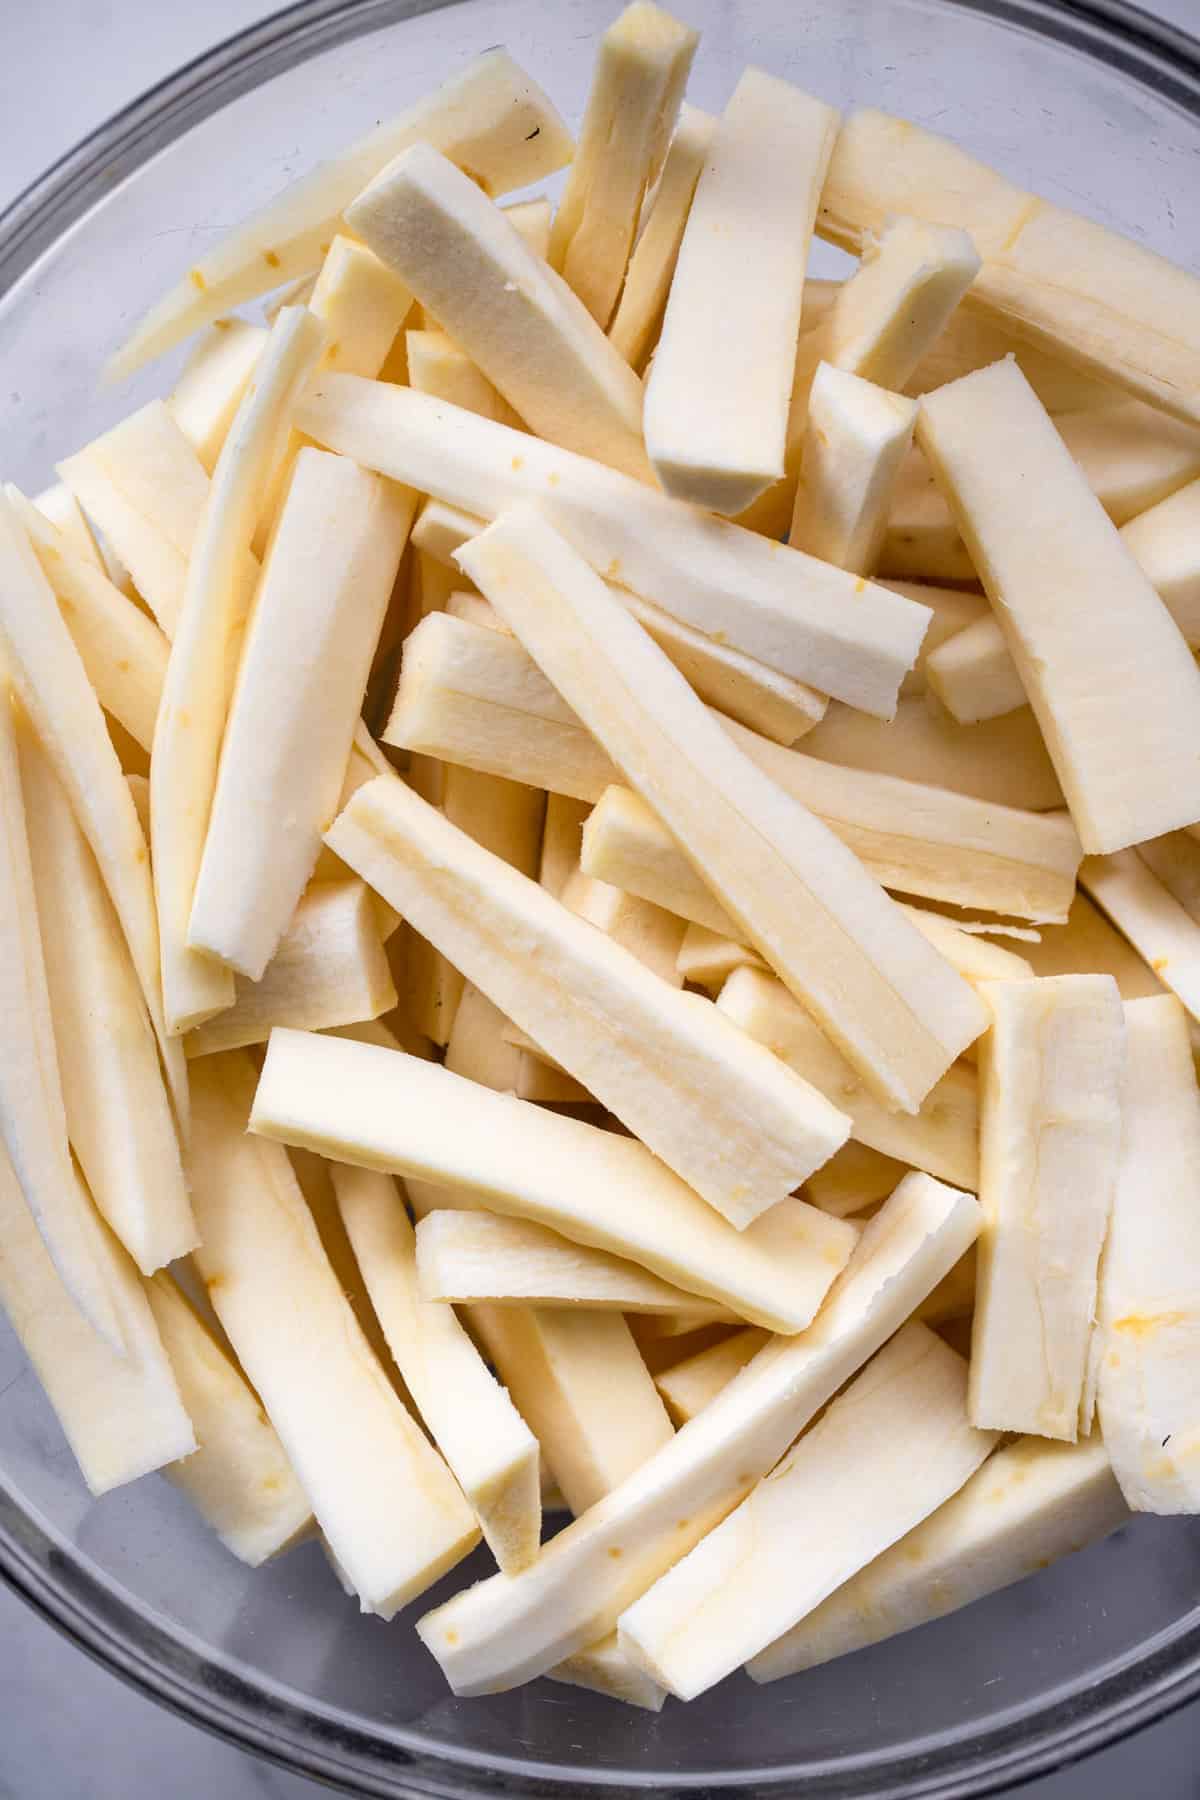 Parsnip Fries cut and ready to be bakes